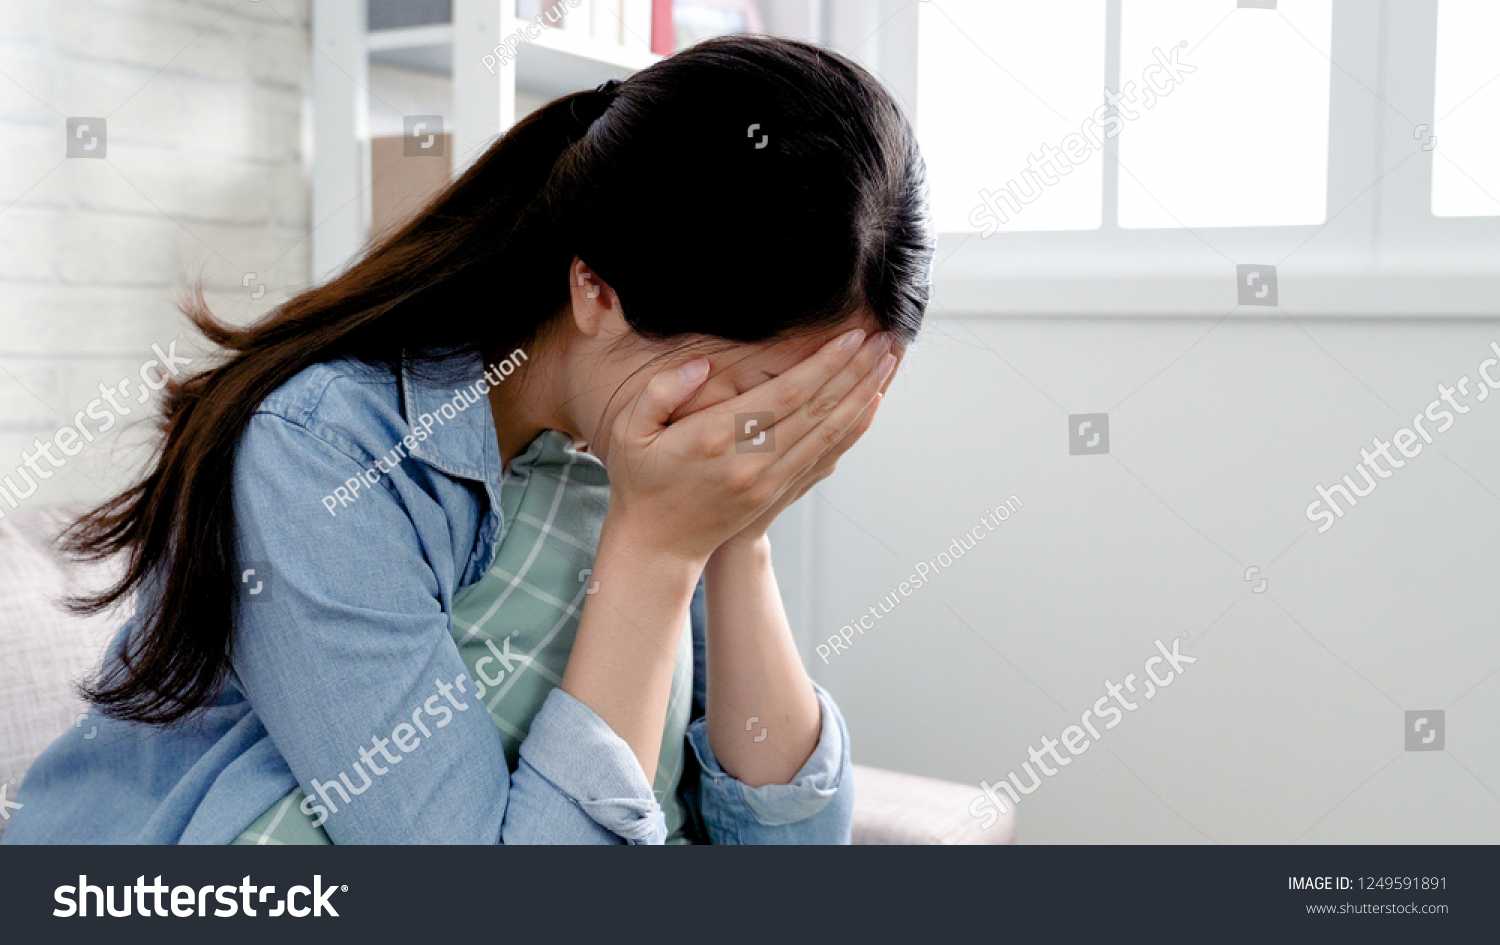 asian woman in cozy room sitting in sofa using hands cover face disappointed crying. emotional girl lovelorn tears heart pain concept staying home feeling broken. unhappy lady sadness indoors. #1249591891